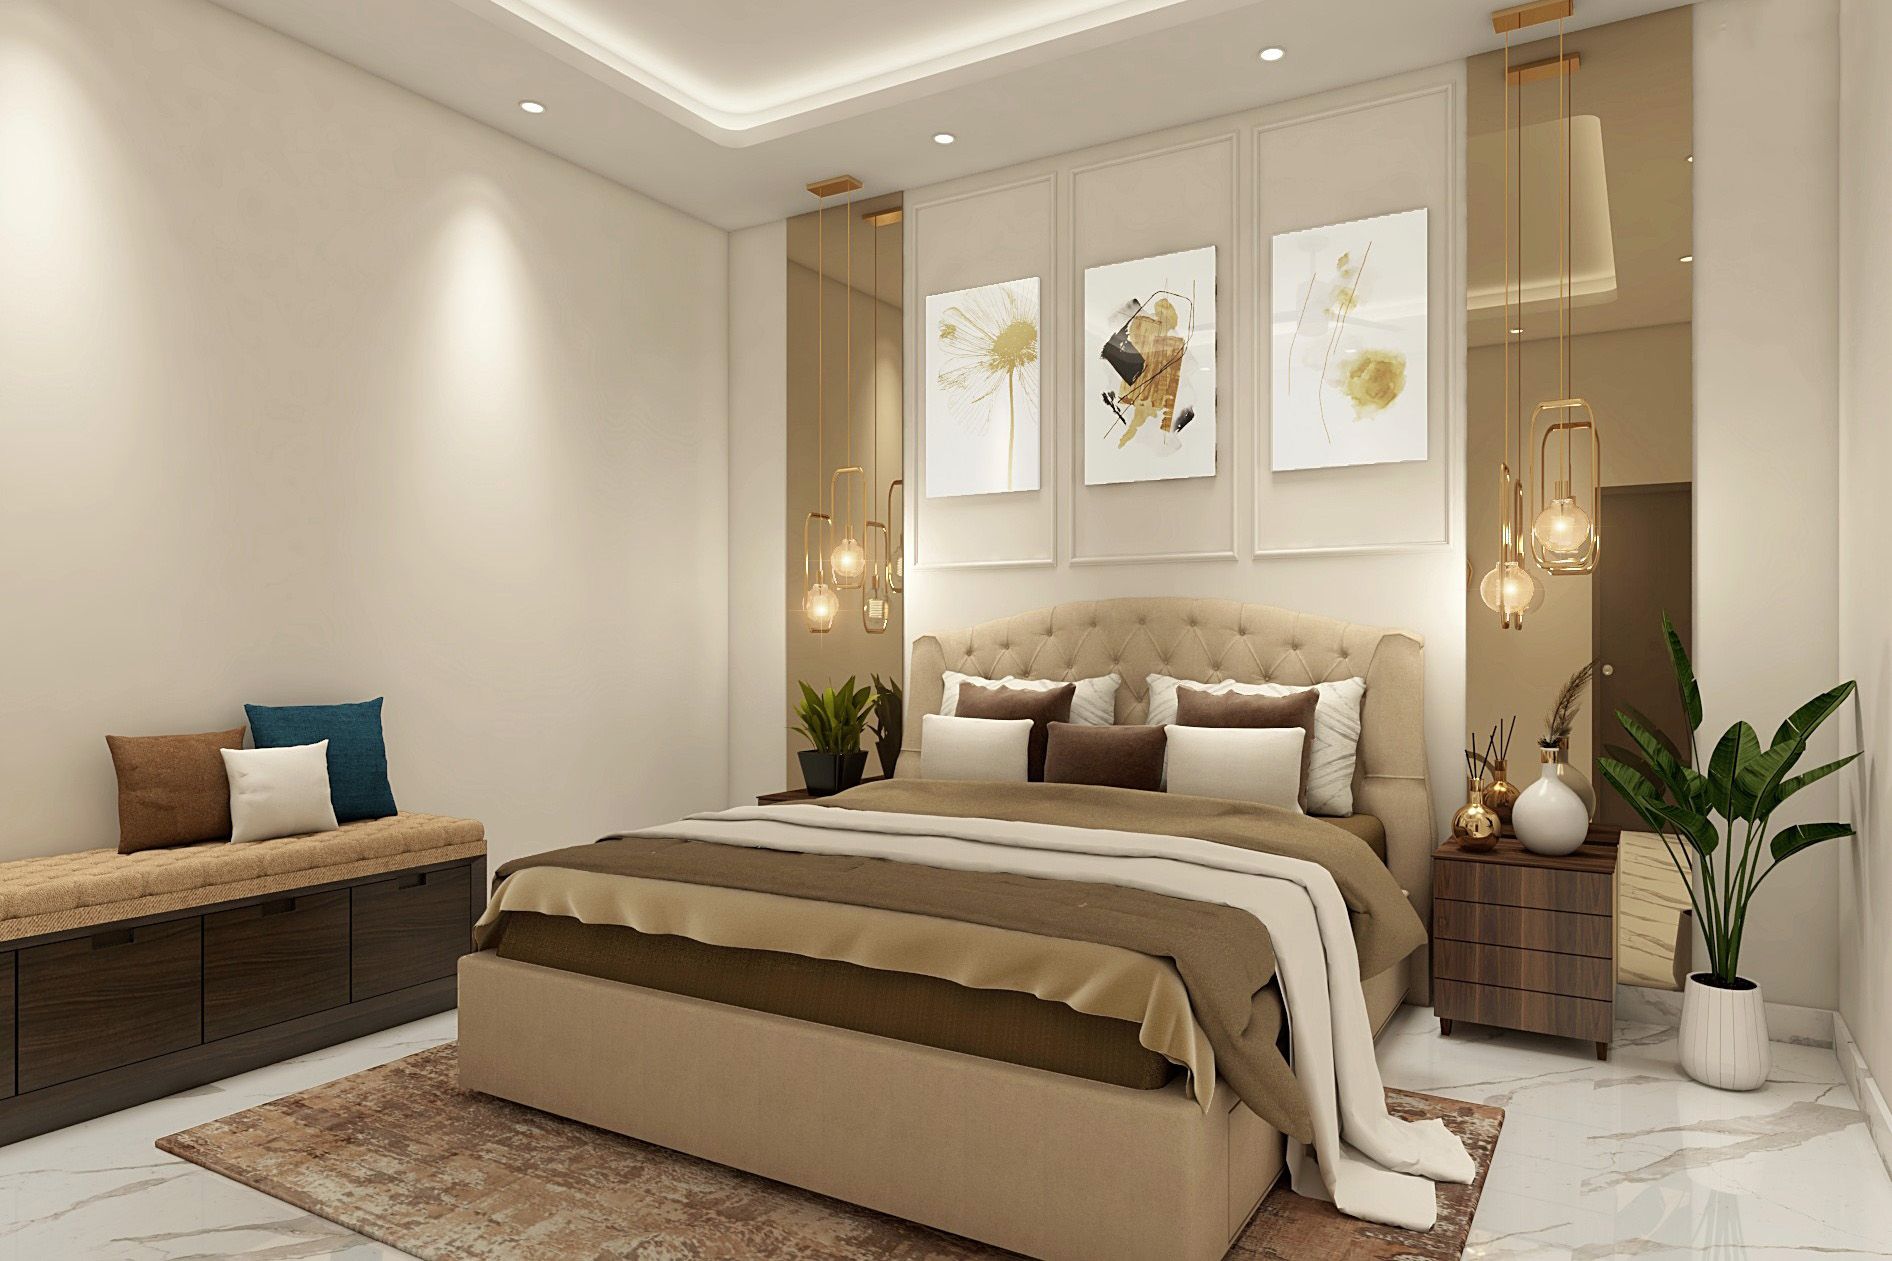 Classic Bedroom Wall Design With Beige Wall Paint And Trims